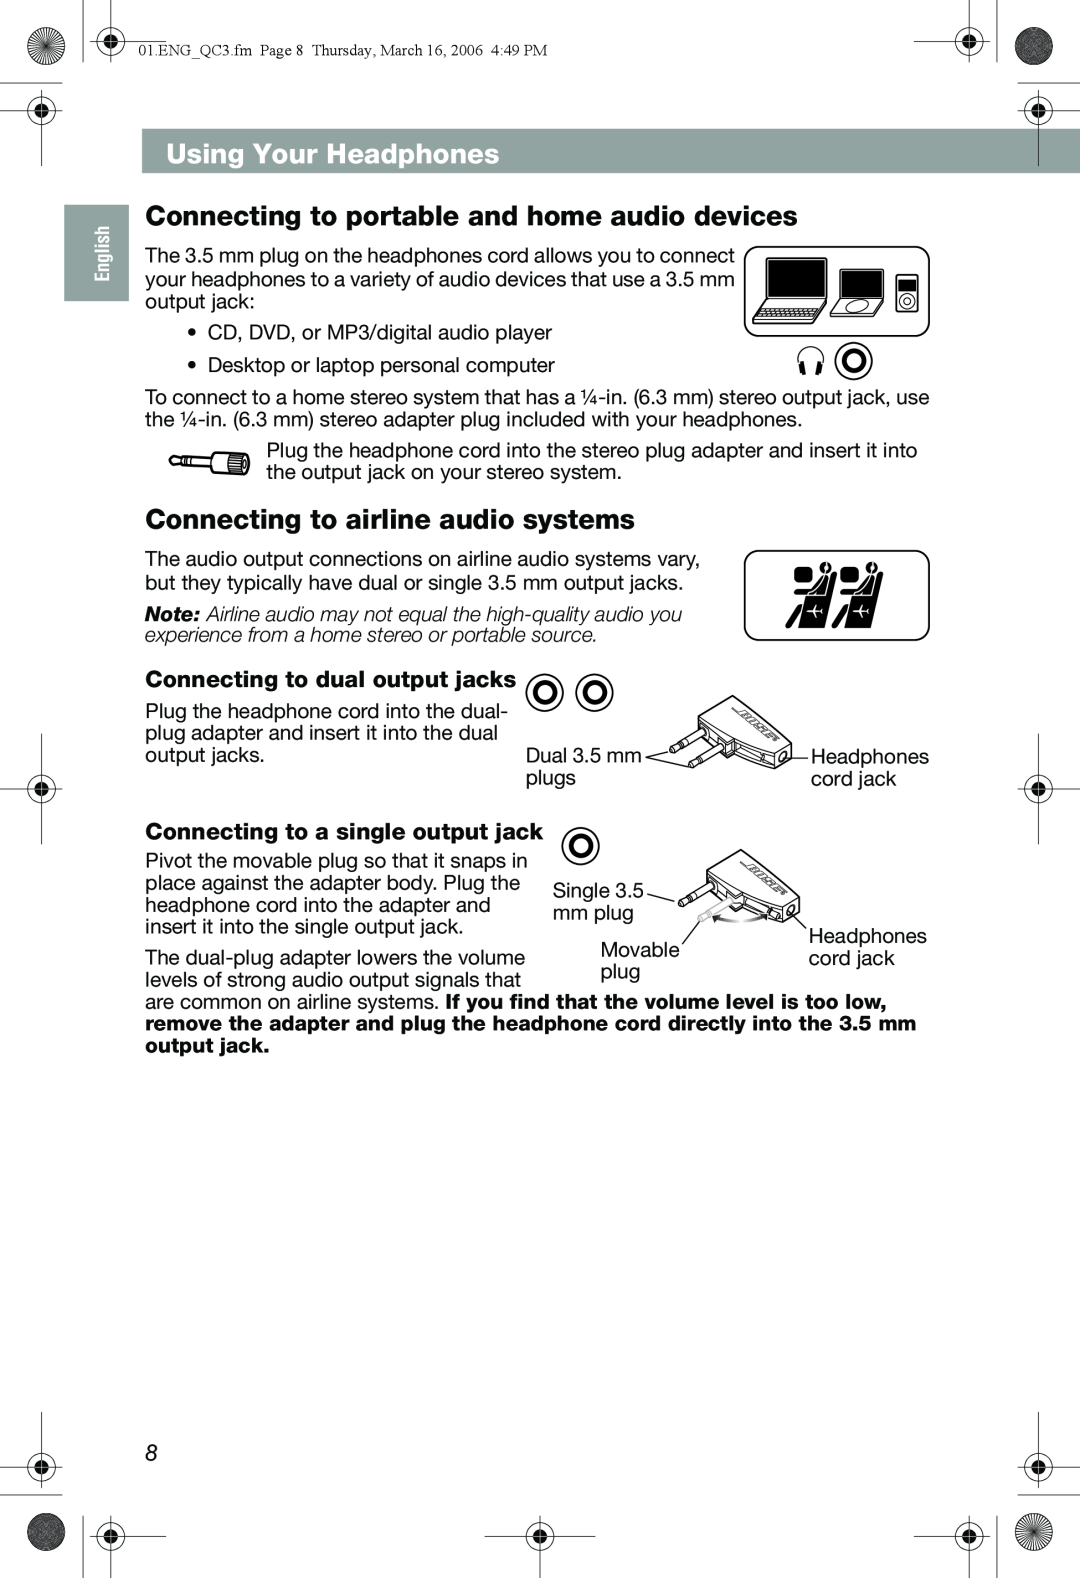 Bose QuietComfort 3 manual Connecting to portable and home audio devices, Connecting to airline audio systems, Français 